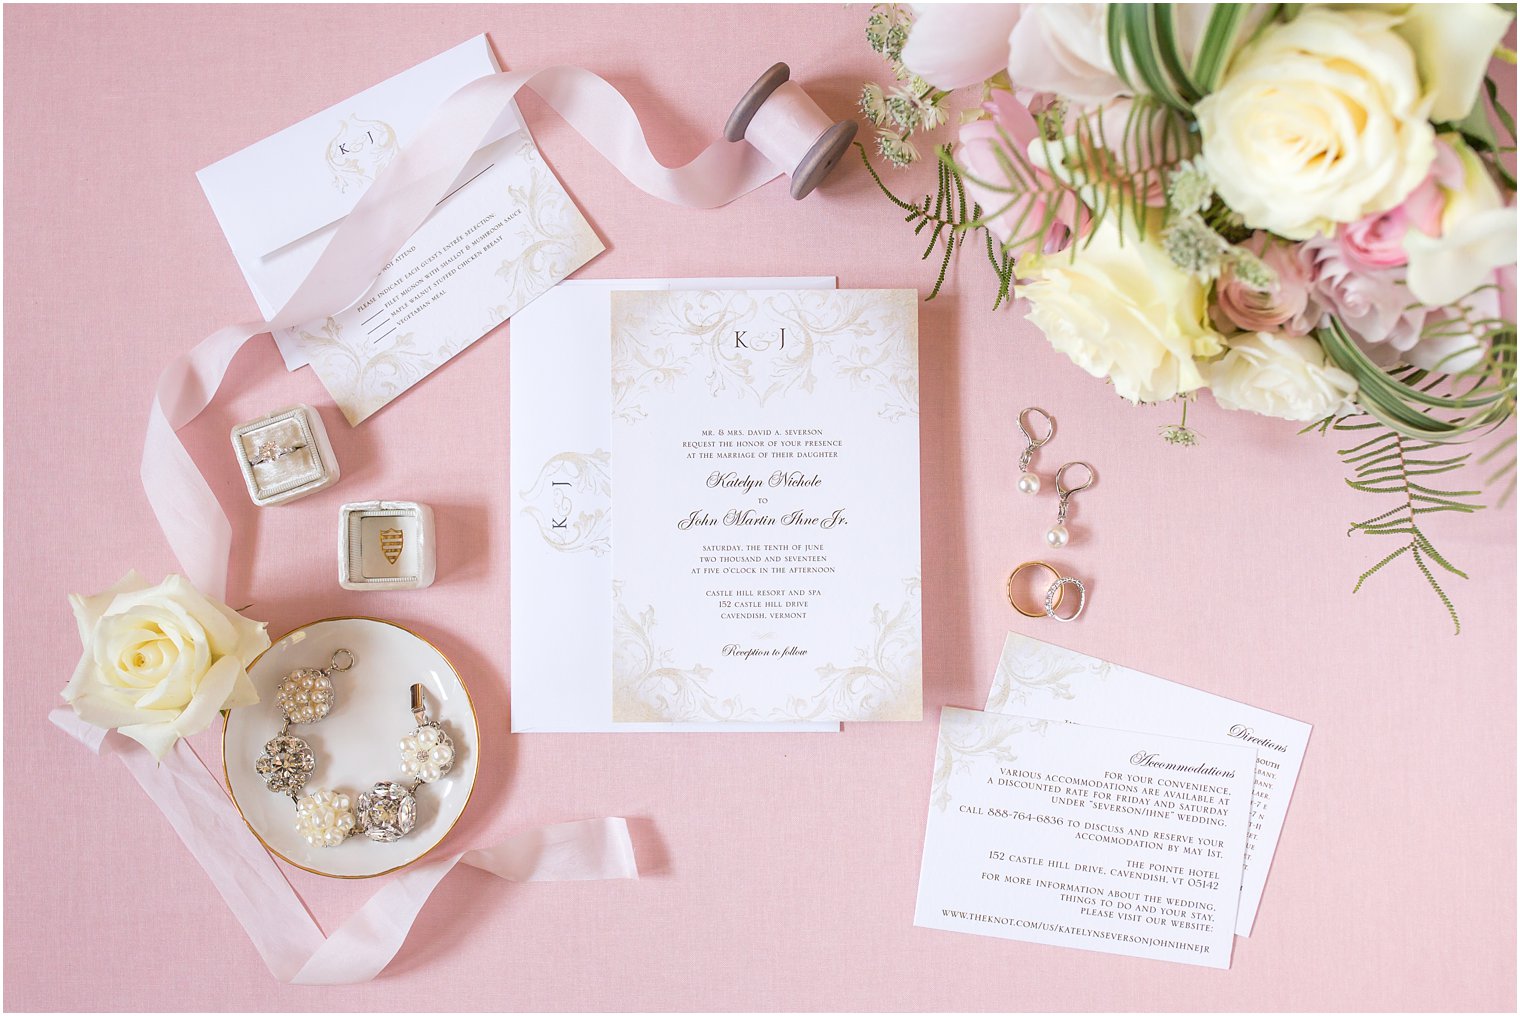 Photo of wedding invitation in gold and pink | Castle Hill Inn Resort in Ludlow, Vermont